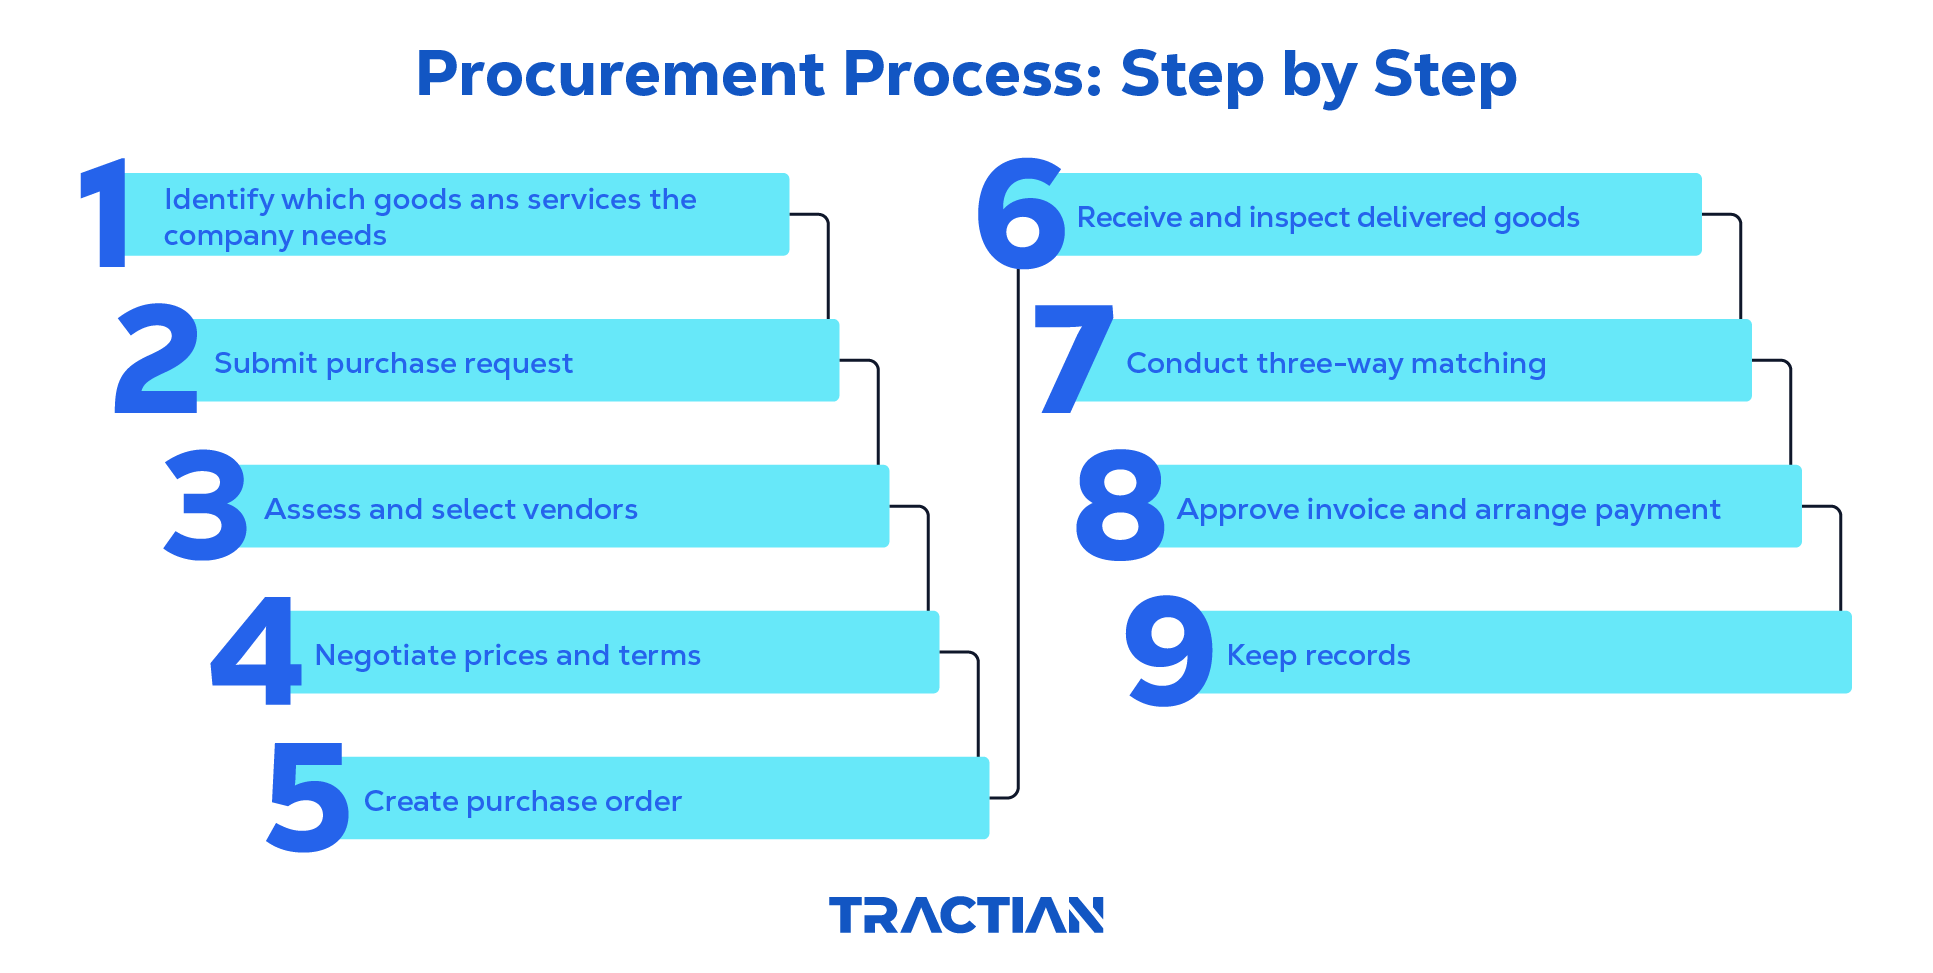 step by step of the procurement process